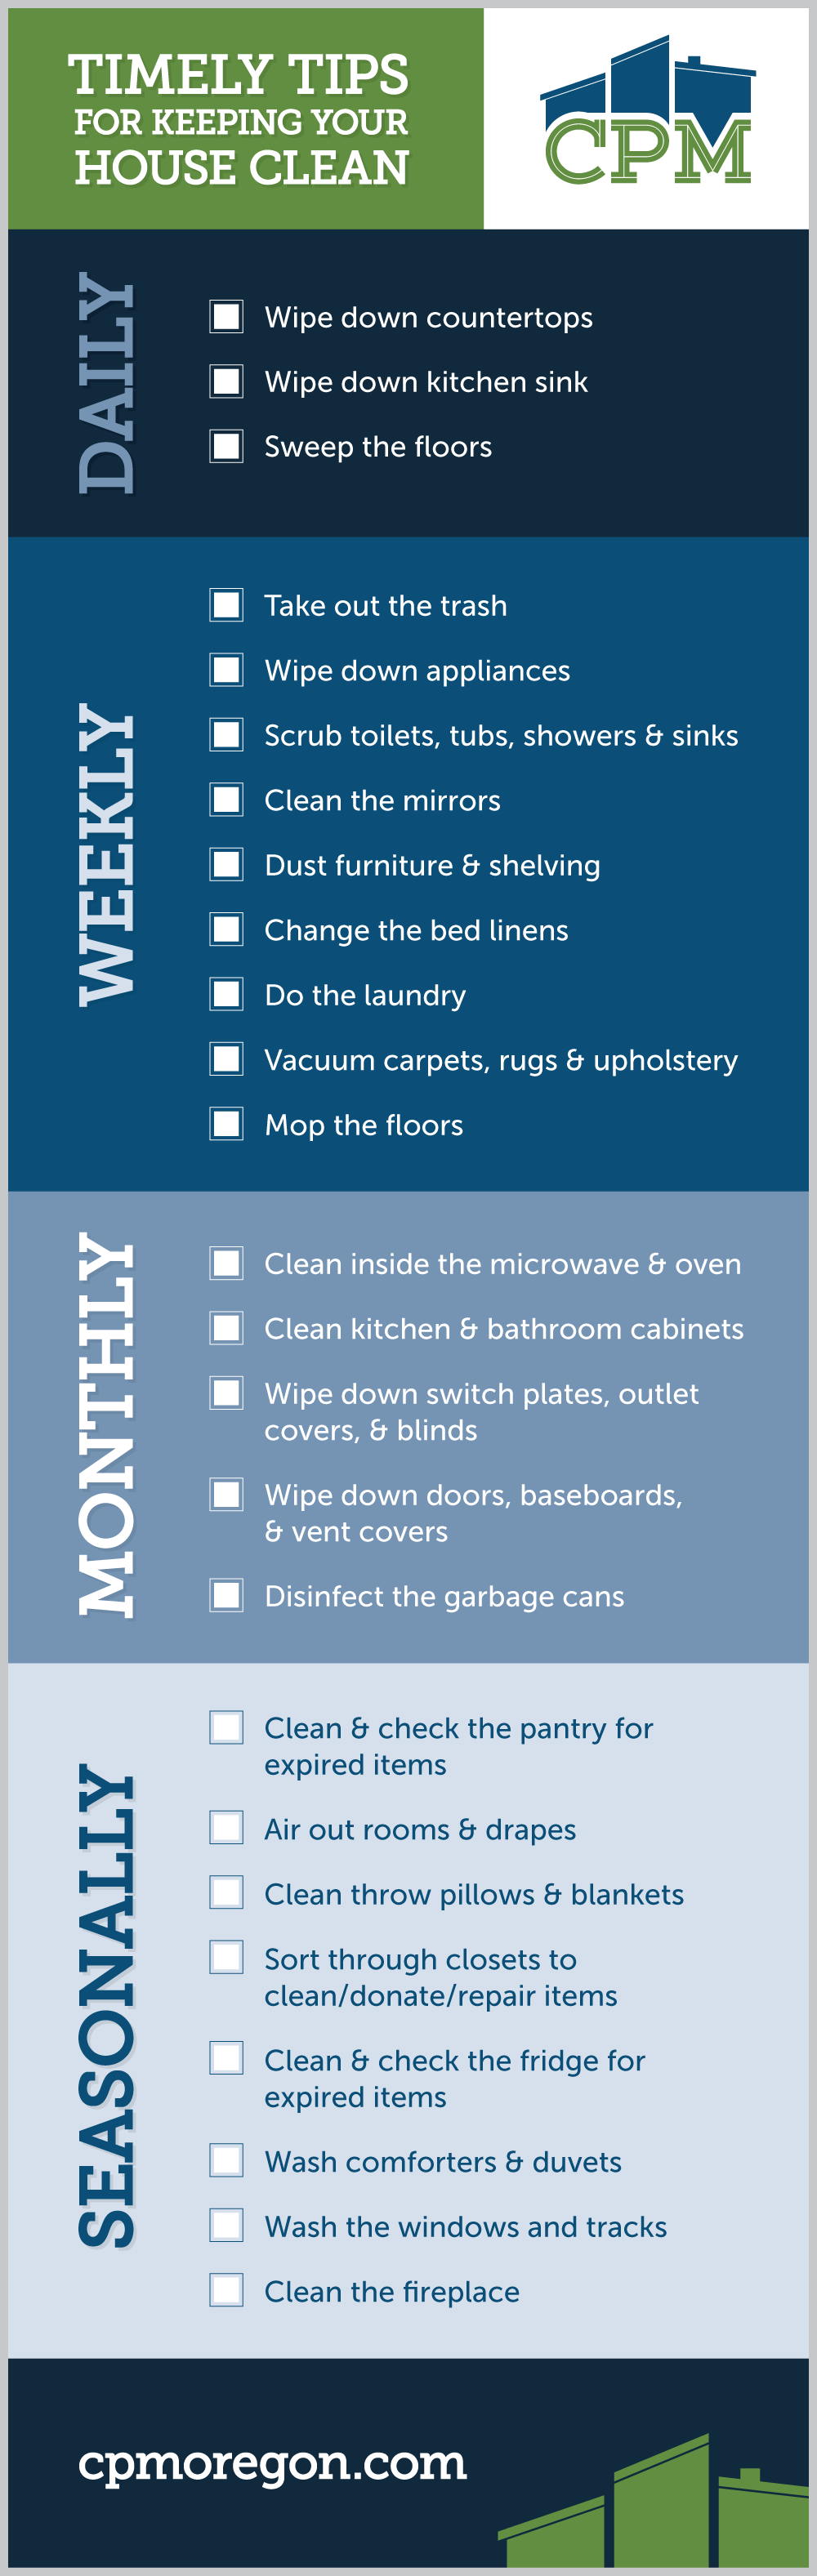 CPM - Timely Tips for Keeping Your House Clean